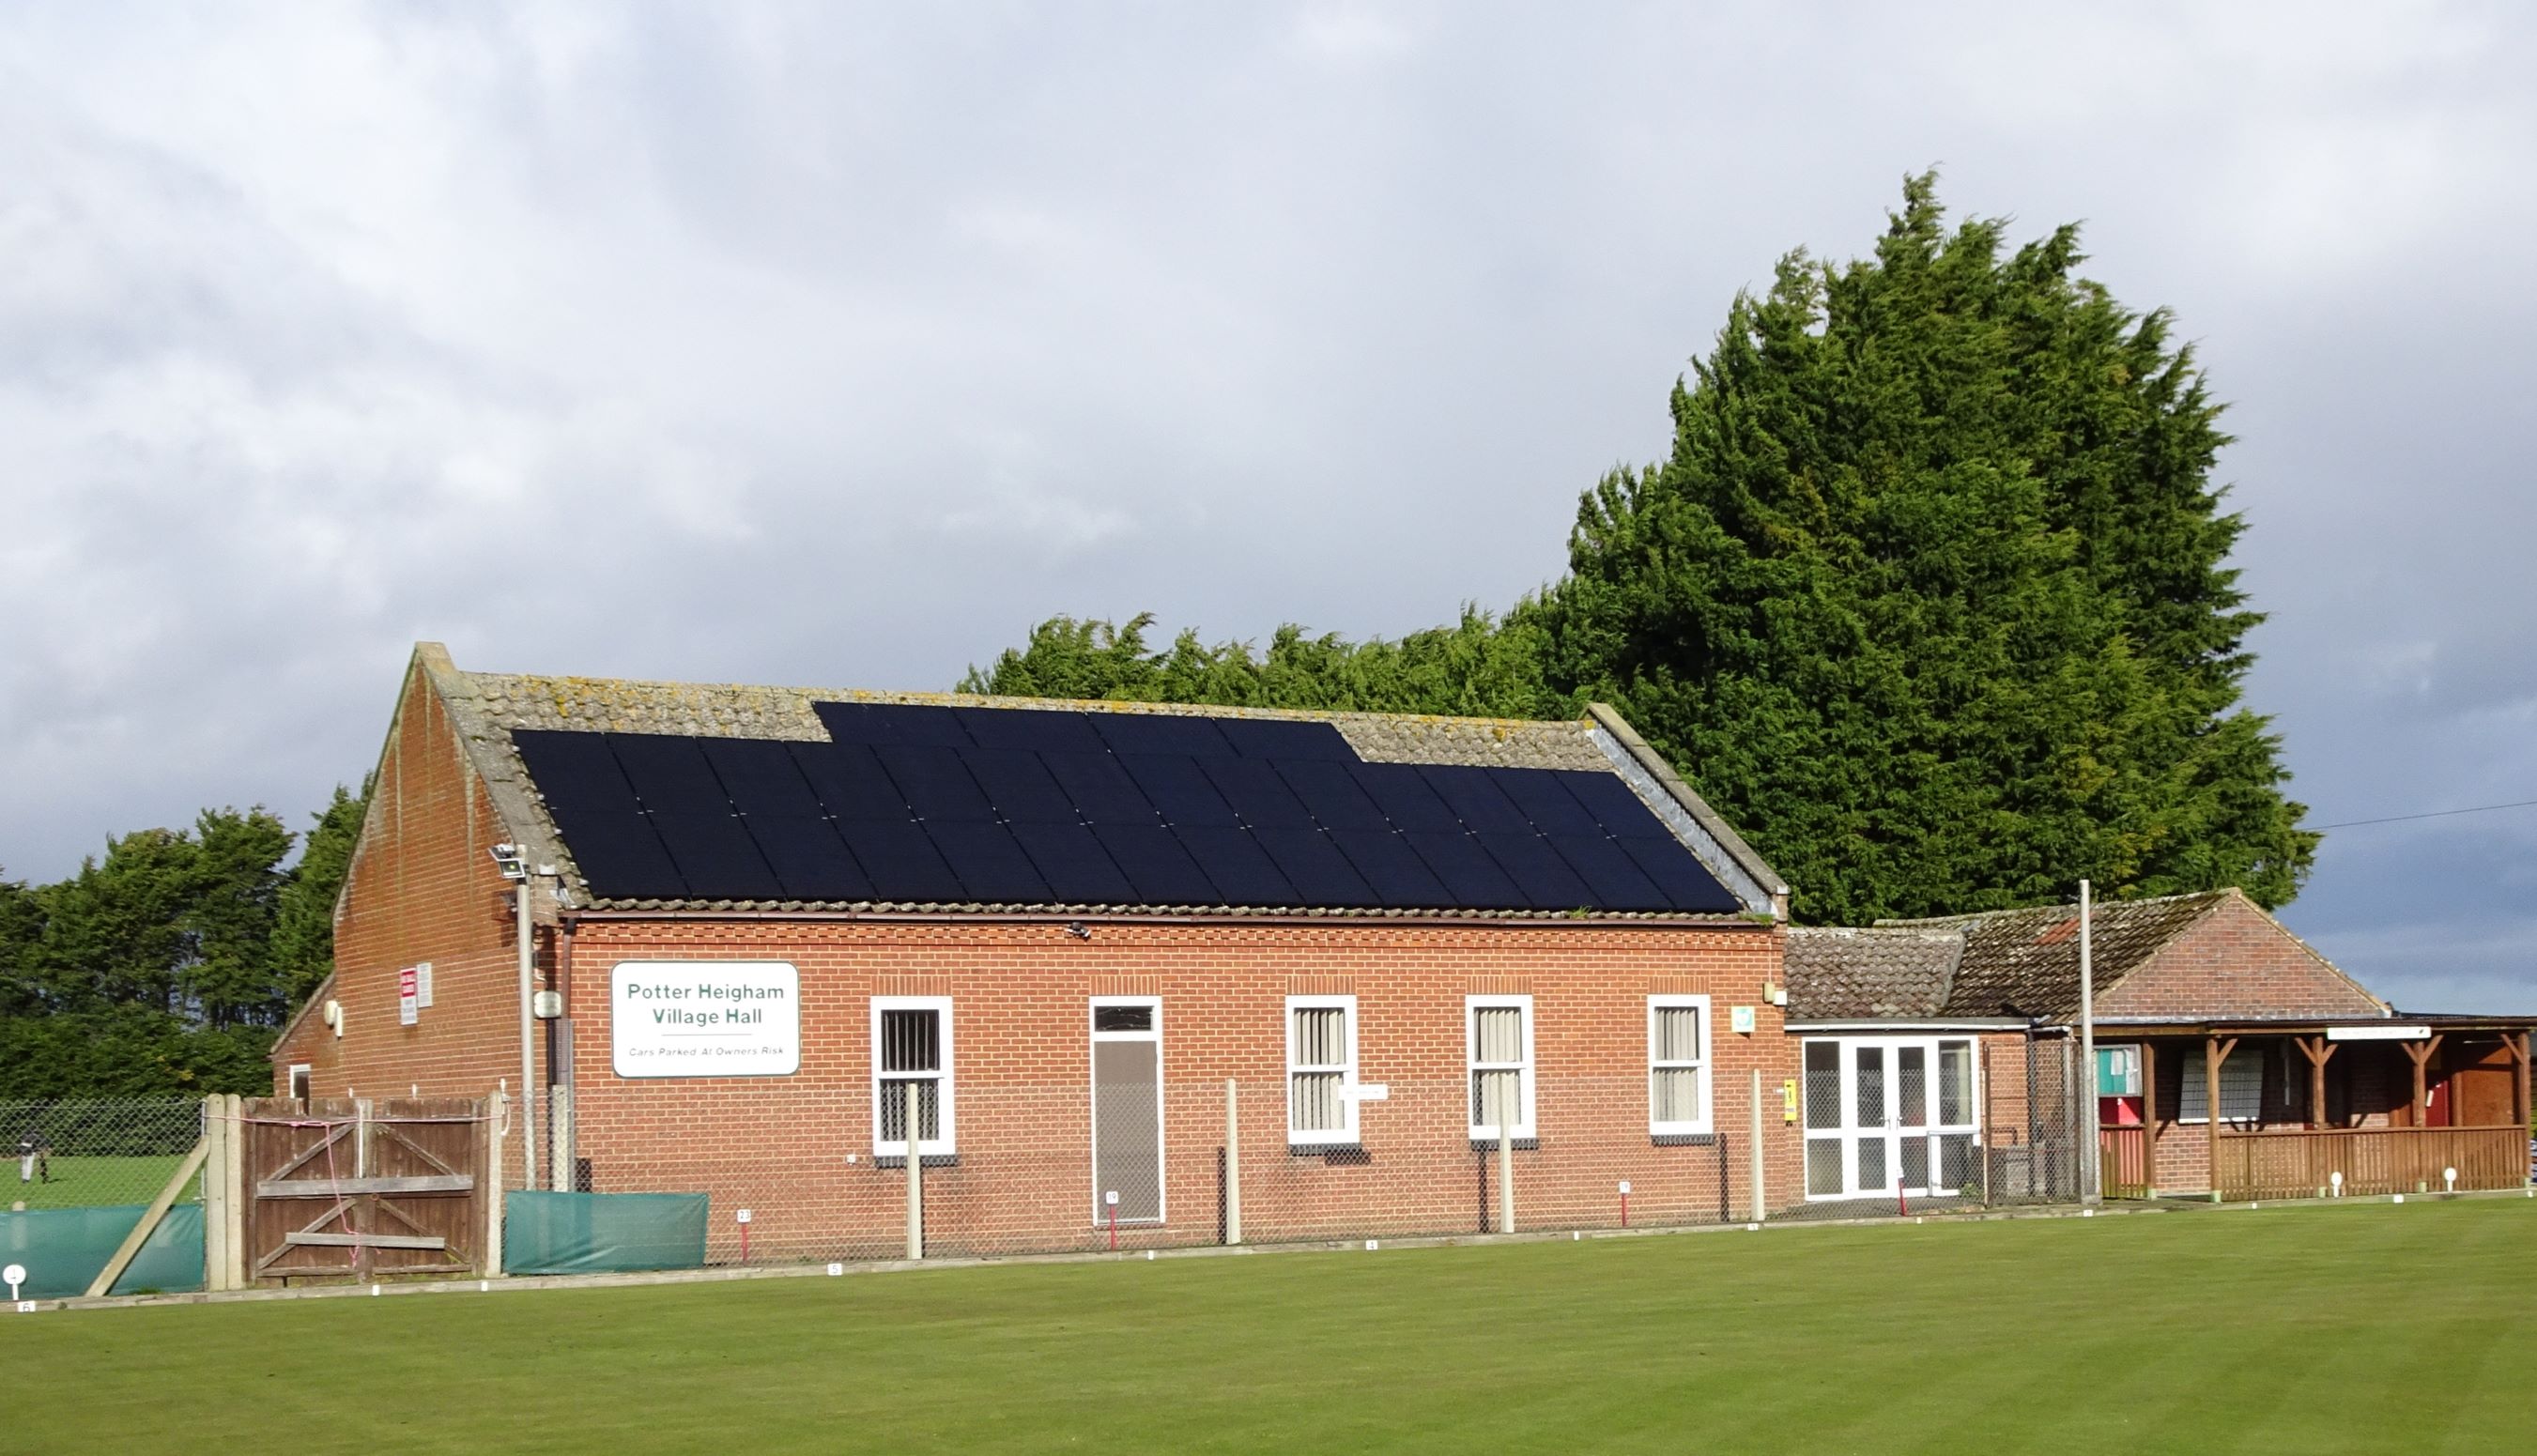 Potter Heigham Village Hall, with the bowls green in the foreround